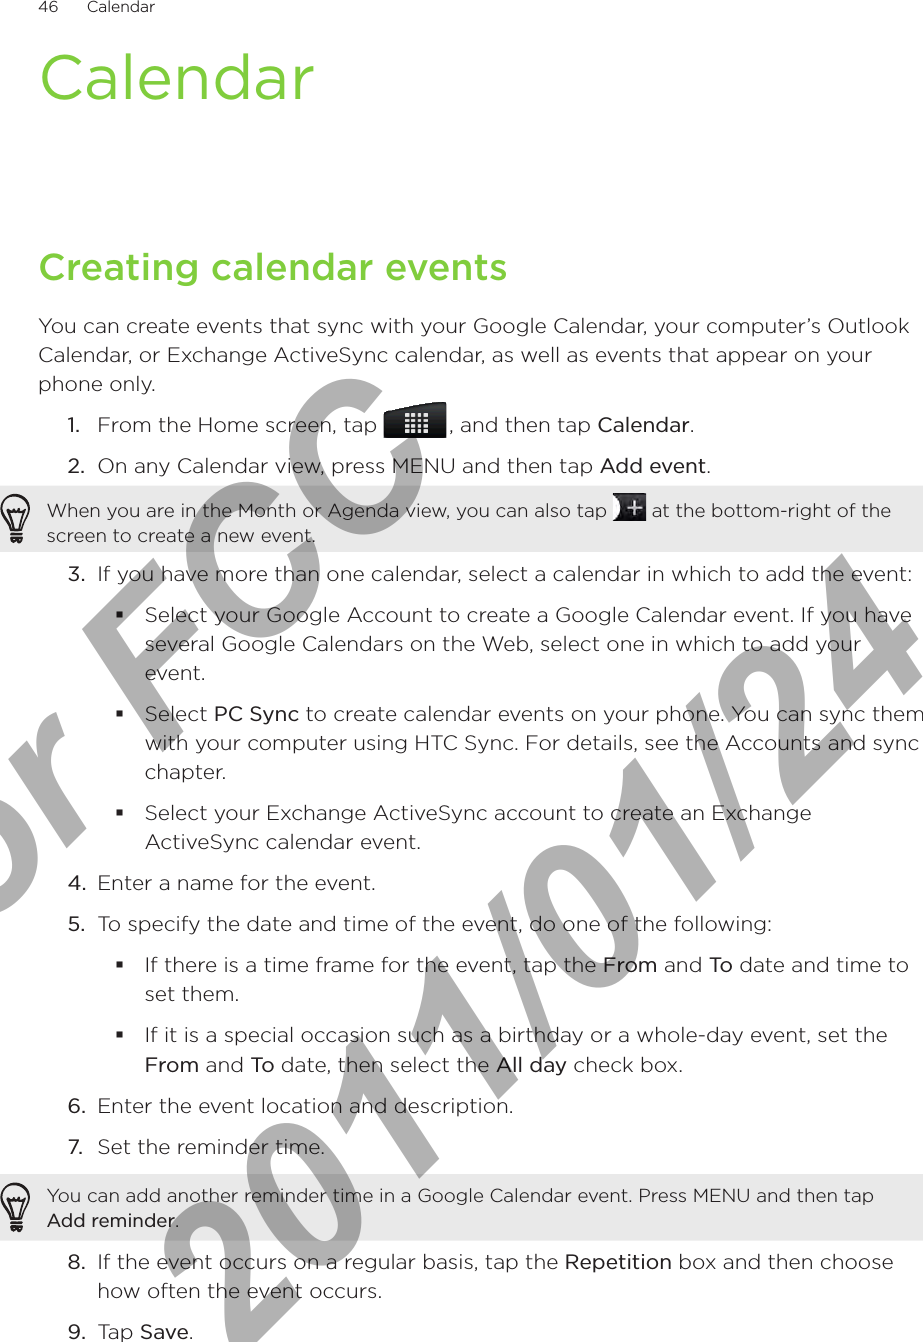 46      Calendar      CalendarCreating calendar eventsYou can create events that sync with your Google Calendar, your computer’s Outlook Calendar, or Exchange ActiveSync calendar, as well as events that appear on your phone only.1.  From the Home screen, tap   , and then tap Calendar.2.  On any Calendar view, press MENU and then tap Add event.When you are in the Month or Agenda view, you can also tap   at the bottom-right of the screen to create a new event.3.  If you have more than one calendar, select a calendar in which to add the event:Select your Google Account to create a Google Calendar event. If you have several Google Calendars on the Web, select one in which to add your event.Select PC Sync to create calendar events on your phone. You can sync them with your computer using HTC Sync. For details, see the Accounts and sync chapter.Select your Exchange ActiveSync account to create an Exchange ActiveSync calendar event.4.  Enter a name for the event.5.  To specify the date and time of the event, do one of the following:If there is a time frame for the event, tap the From and To date and time to set them.If it is a special occasion such as a birthday or a whole-day event, set the From and To date, then select the All day check box.6.  Enter the event location and description.7.  Set the reminder time.You can add another reminder time in a Google Calendar event. Press MENU and then tap Add reminder.8.  If the event occurs on a regular basis, tap the Repetition box and then choose how often the event occurs.9.  Tap Save.For FCC  2011/01/24